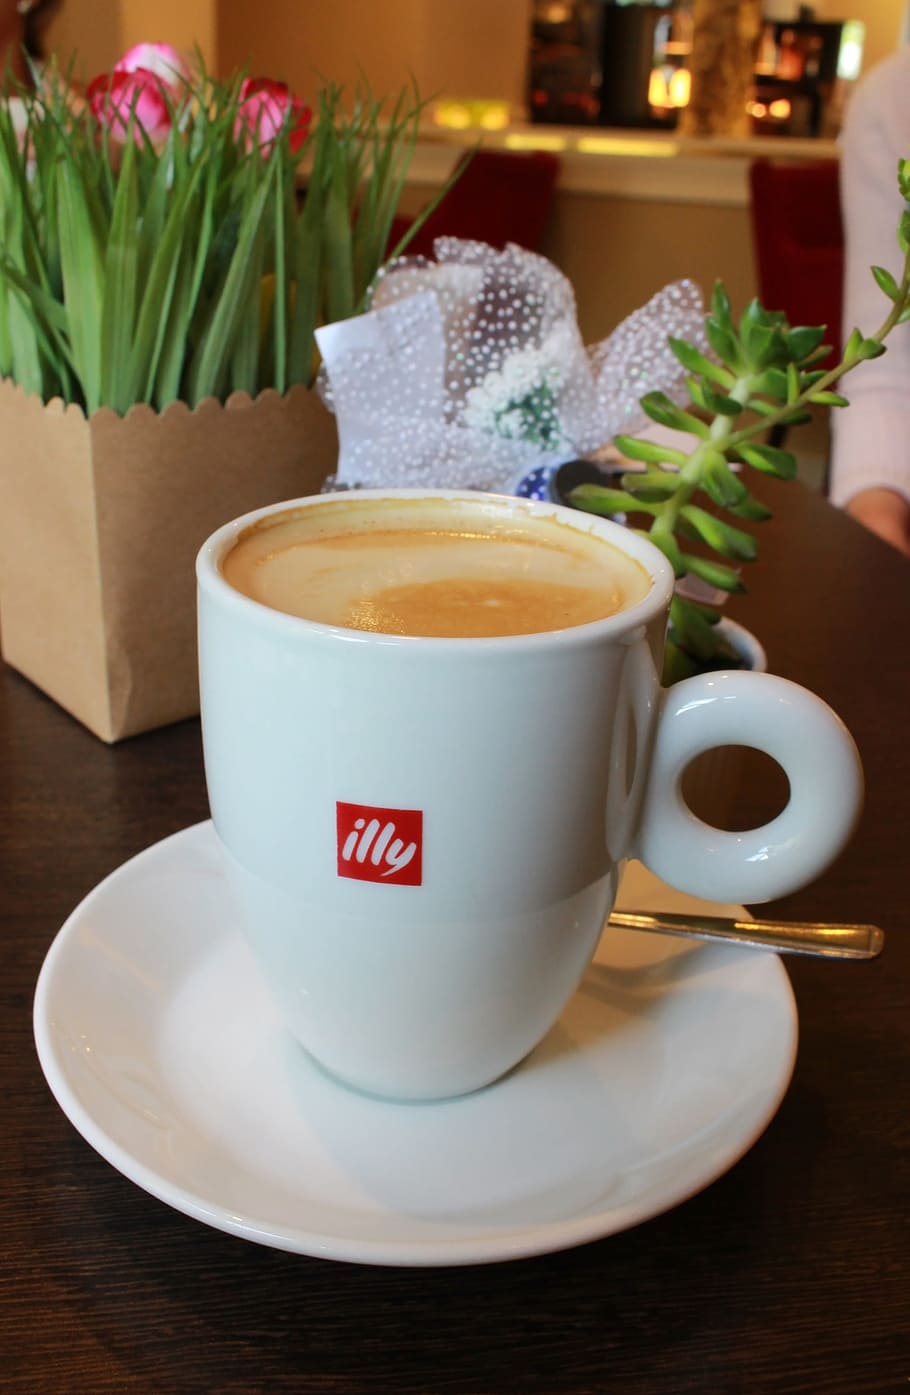 Cup of Illy branded coffee - Illycaffe is an Italian coffee roasting company specializing in espresso - Editorial Use Only